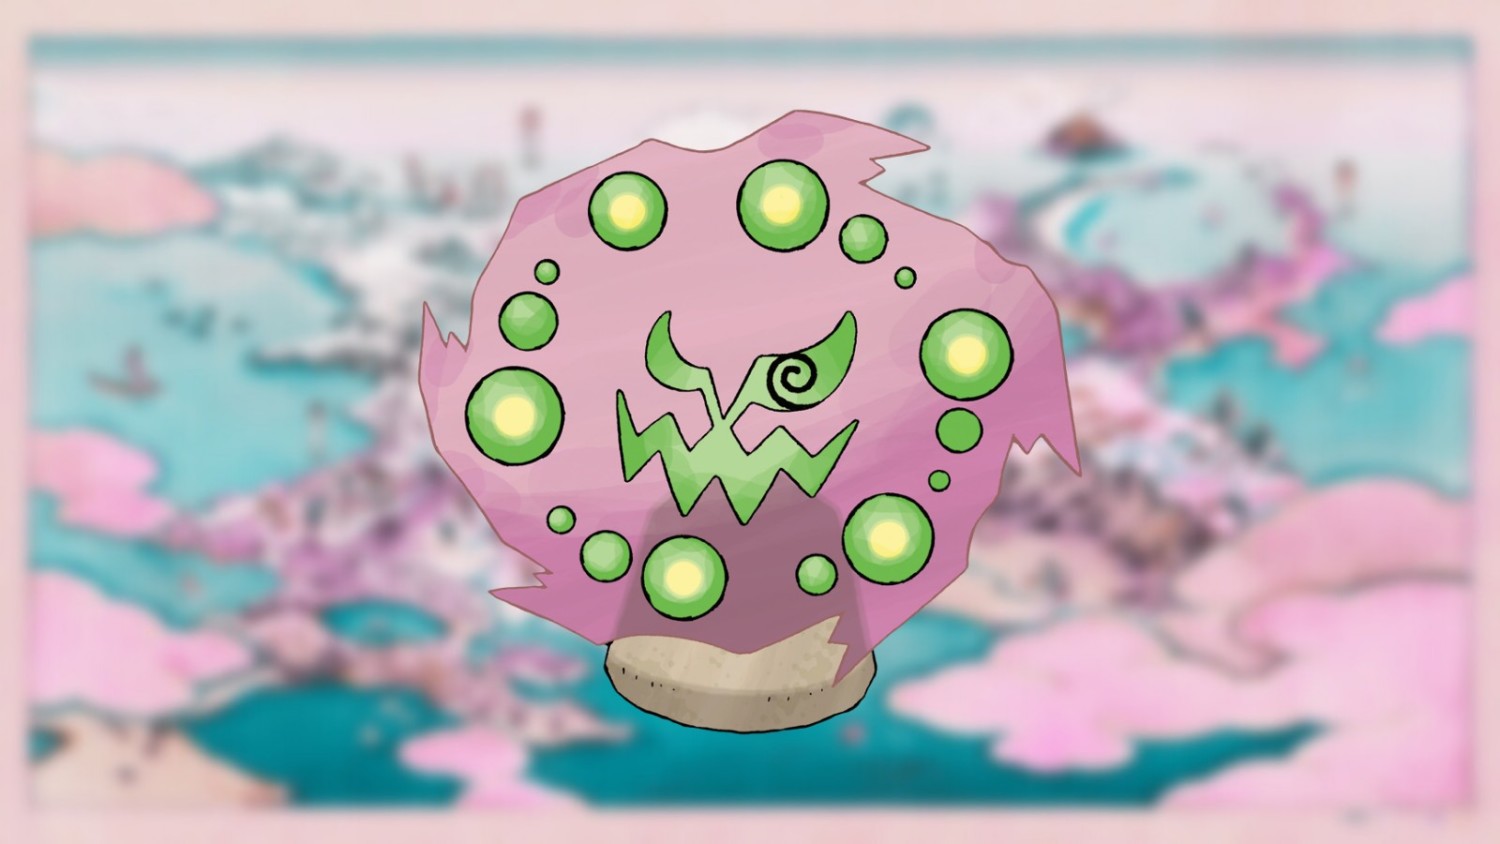 Where to catch Spiritomb in Pokémon Scarlet and Violet